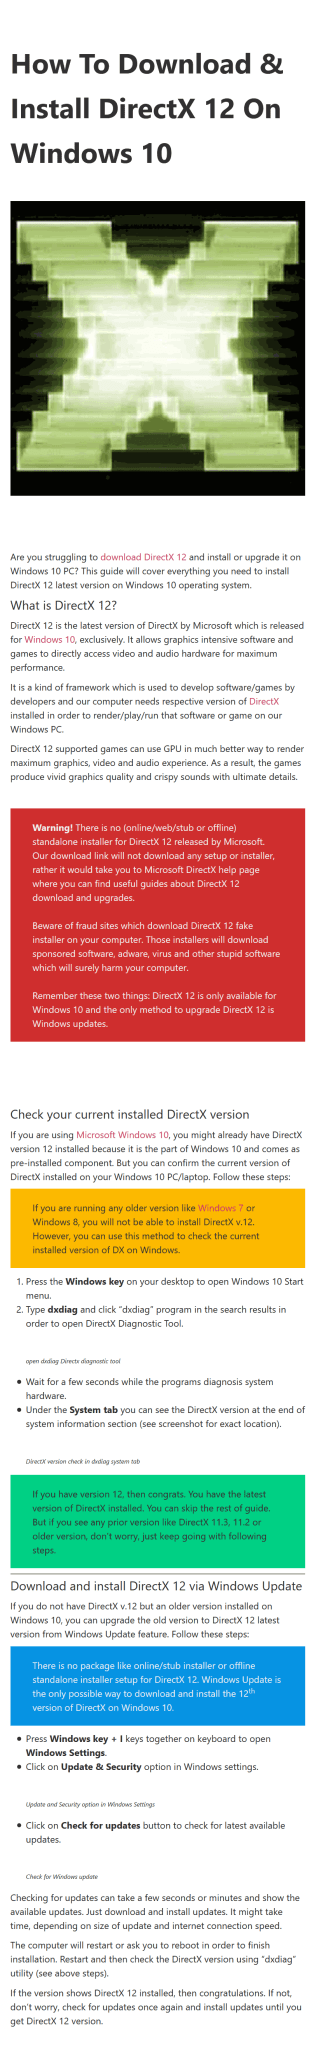 download free directx 12 for windows 10